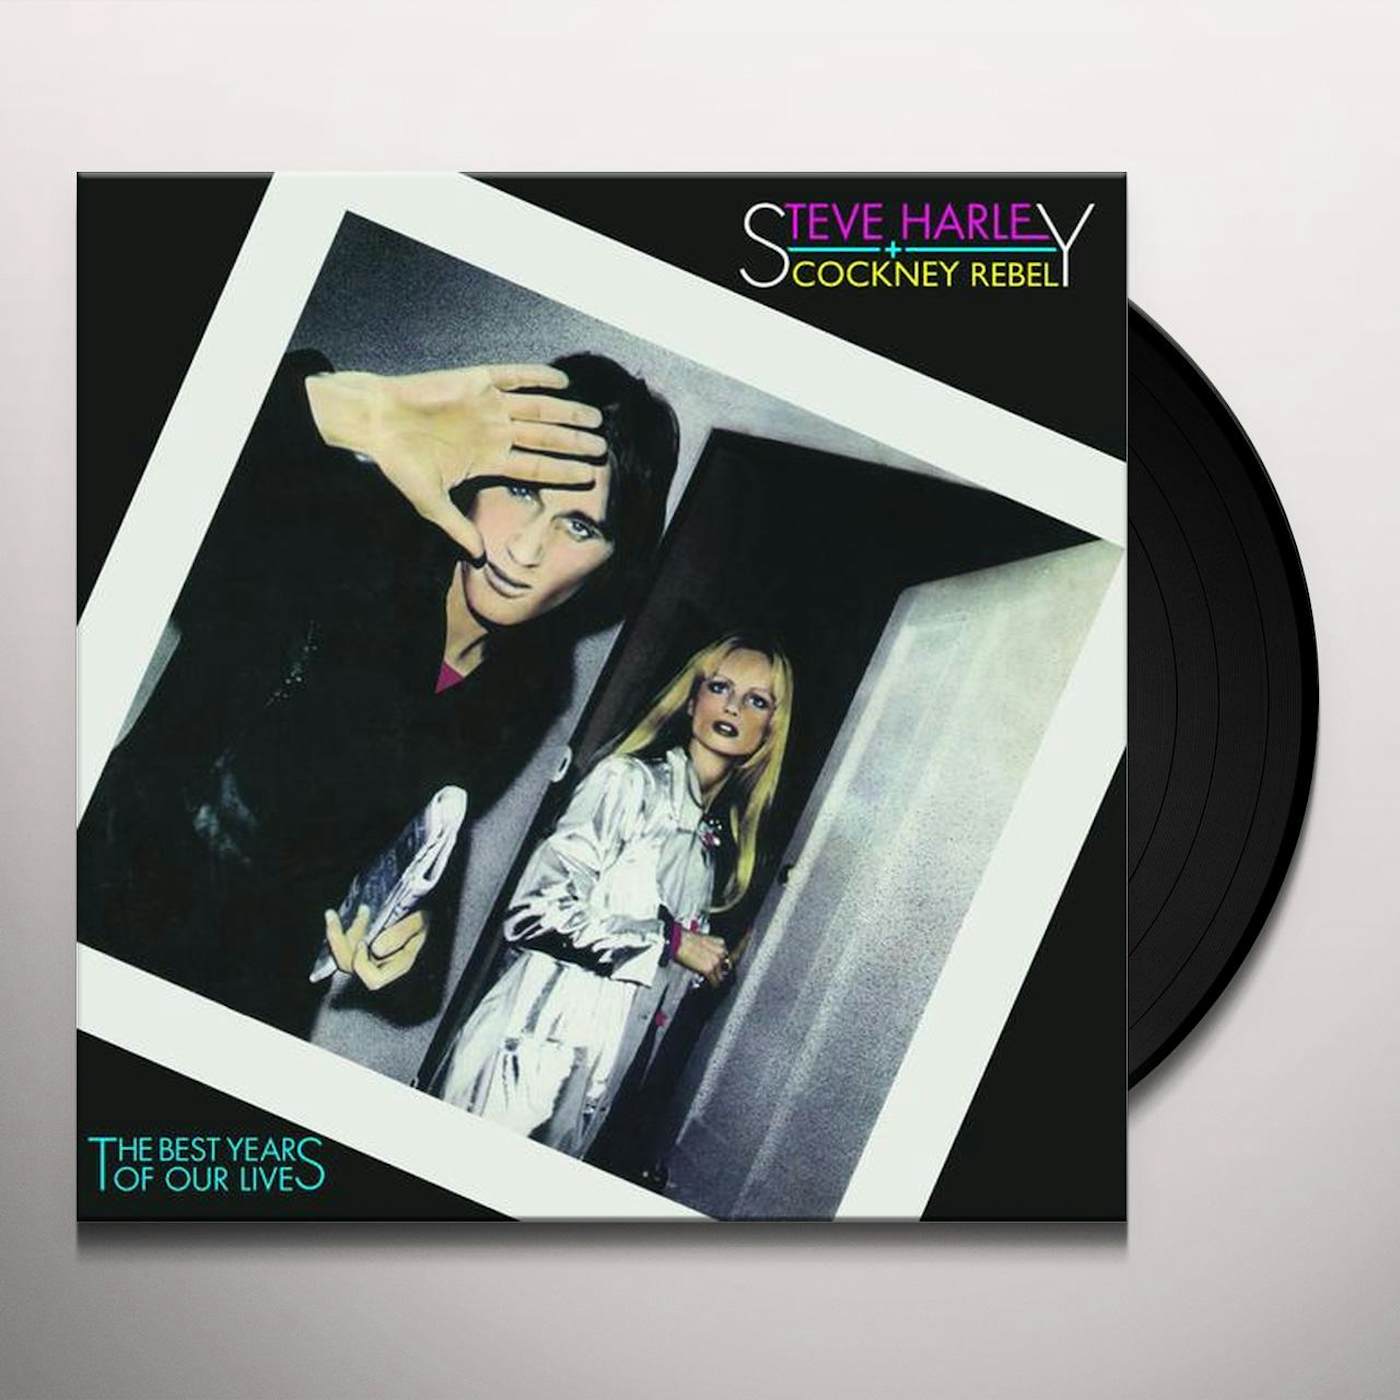 Steve Harley & Cockney Rebel BEST YEARS OF OUR LIVES (45TH ANNIVERSARY LIMITED Vinyl Record